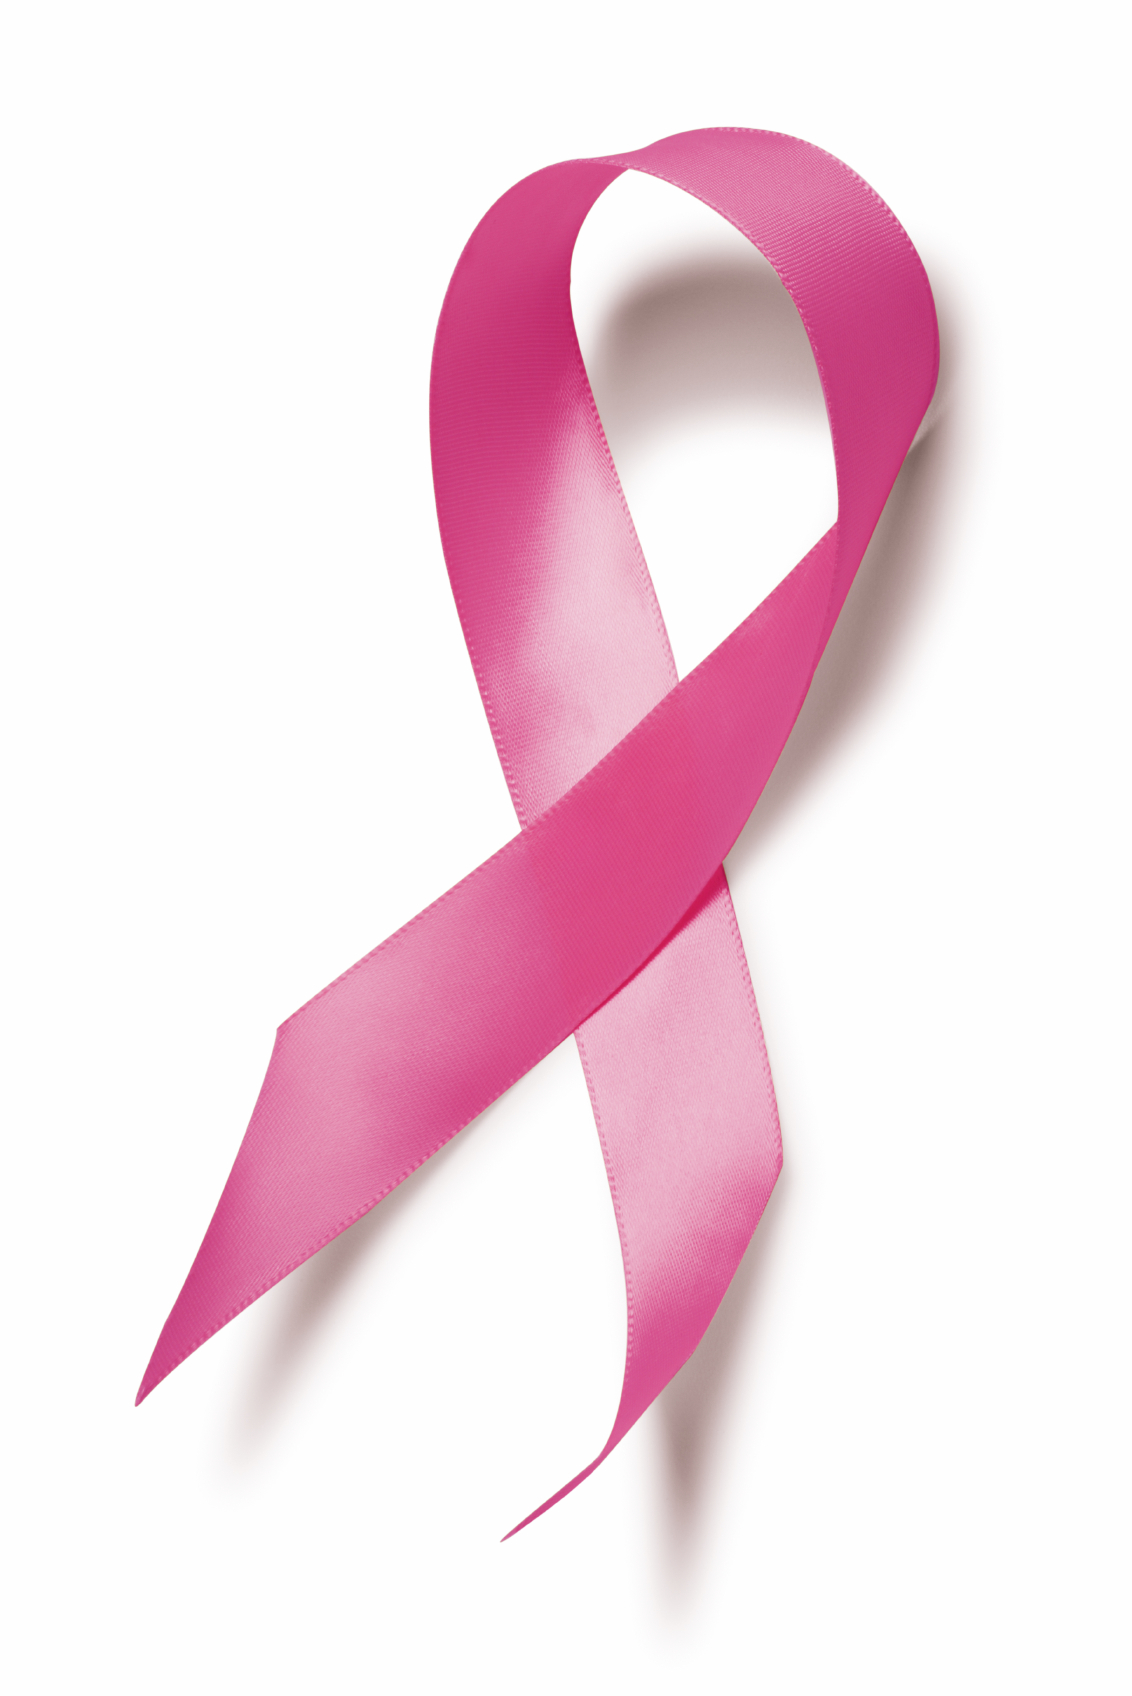 Breast Cancer Ribbon Vector Free - ClipArt Best